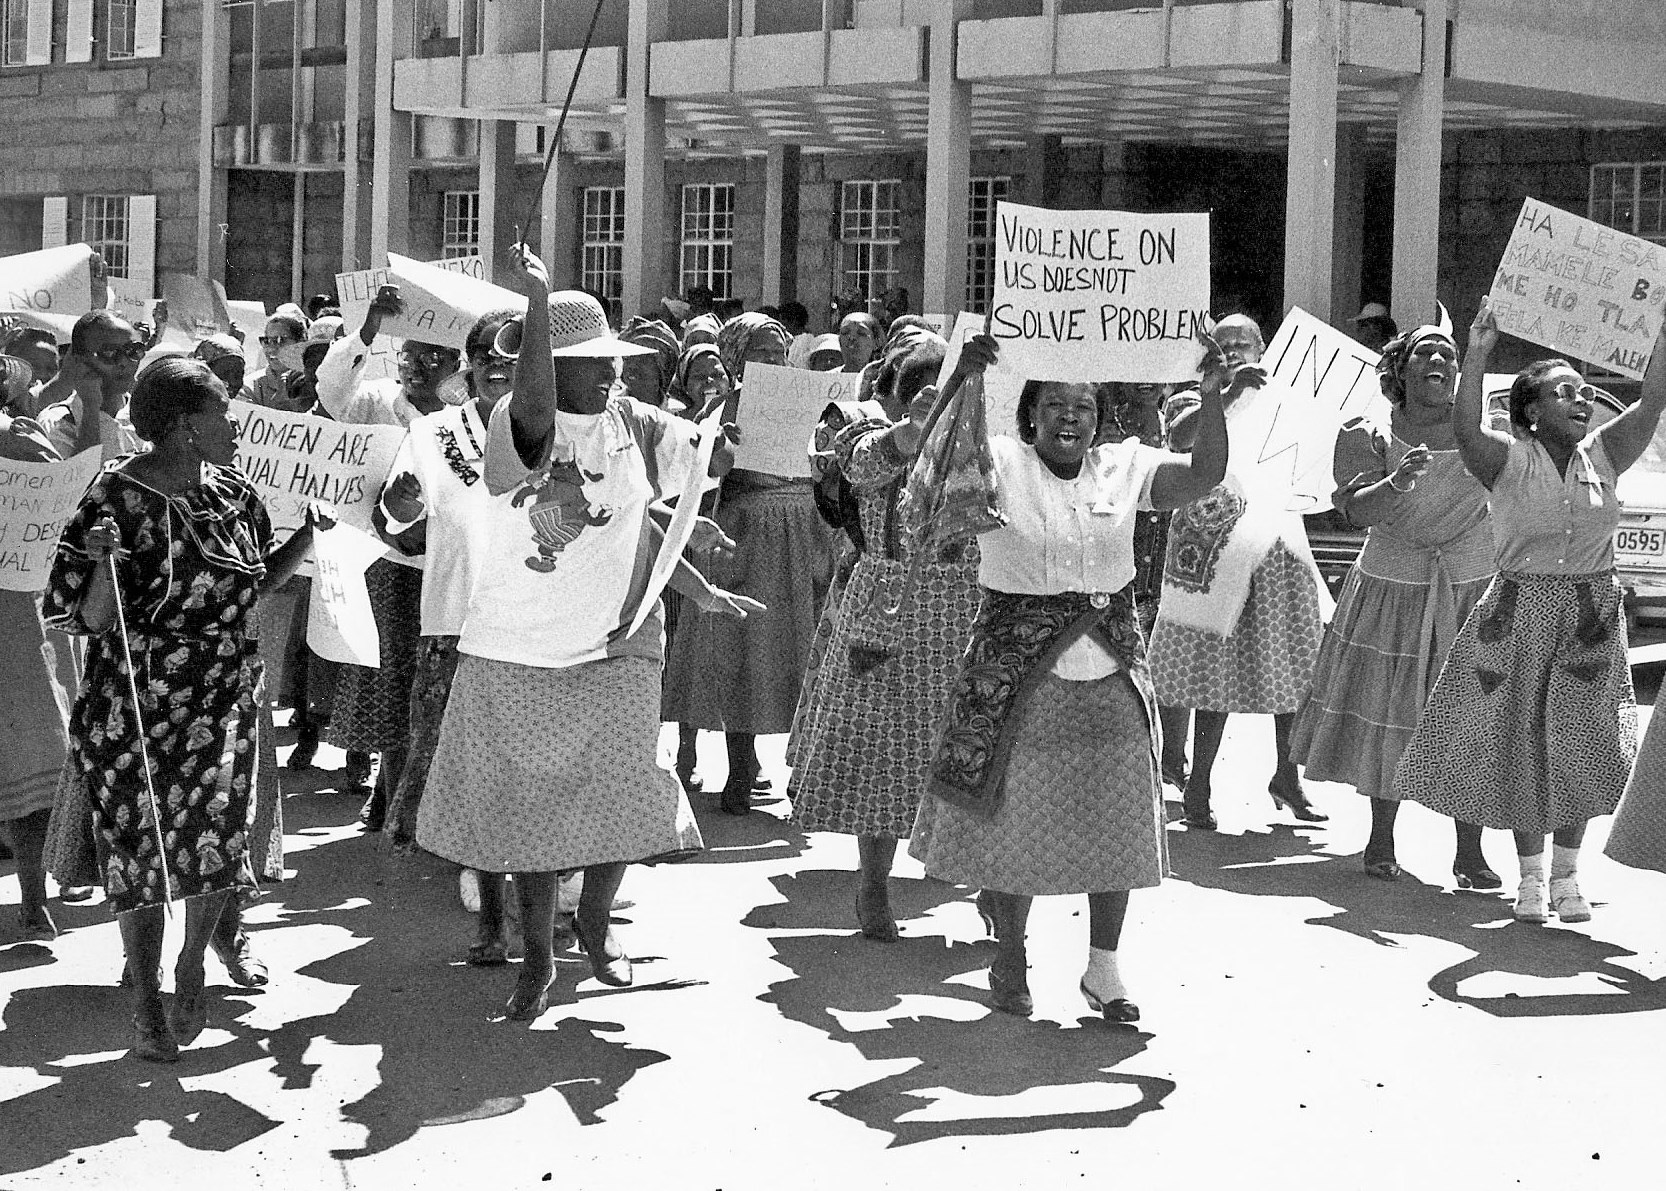 Black and white photo of Black women marching in the street holding protest signs.